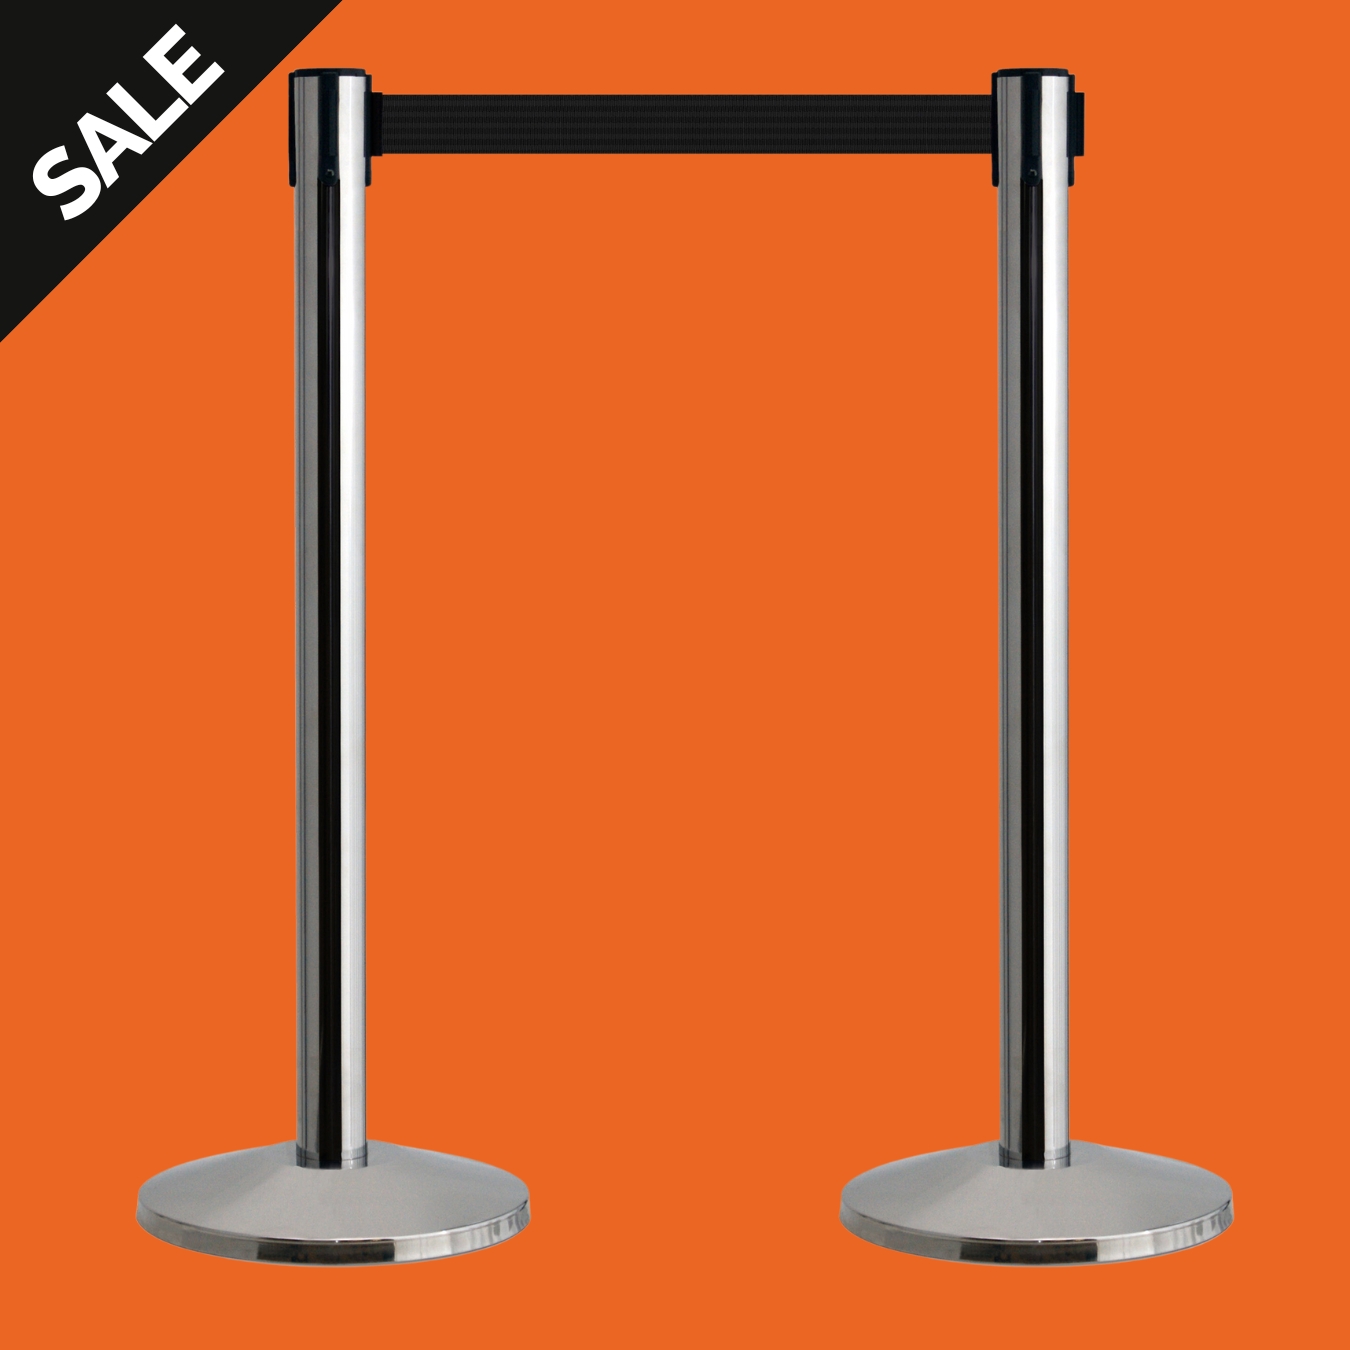 Two QueueWay Retractable Belt Barriers with Polished Chrome Posts and Black Webbing